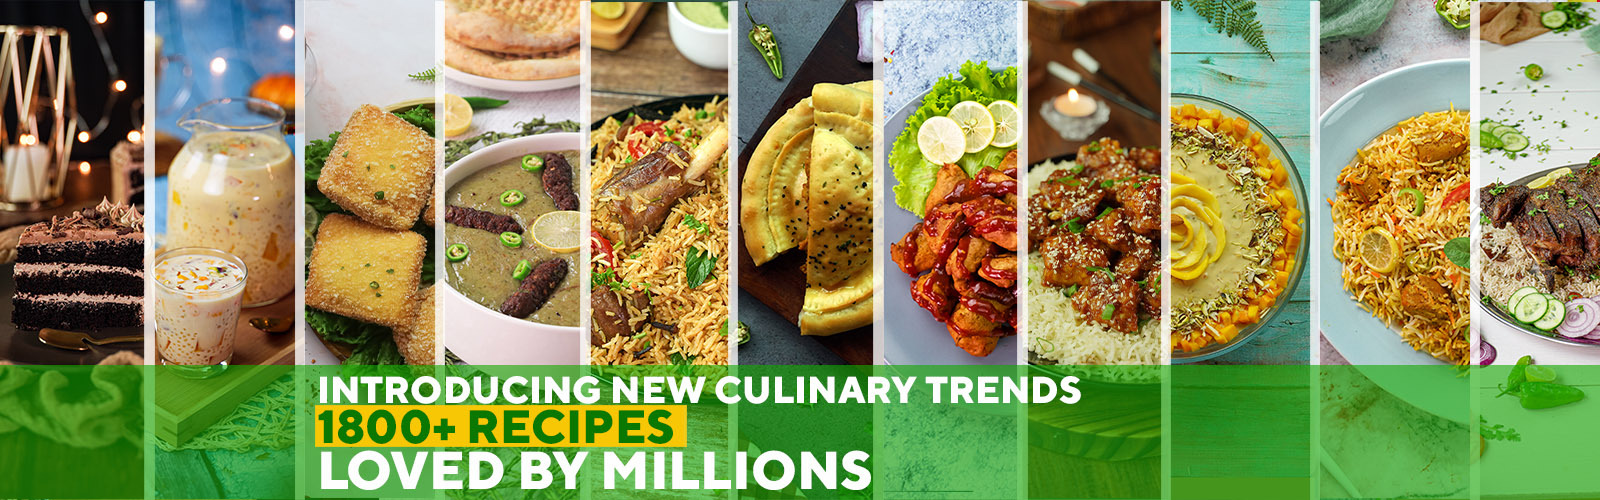 introducing new culinary trends 1800 recipes loved by millions